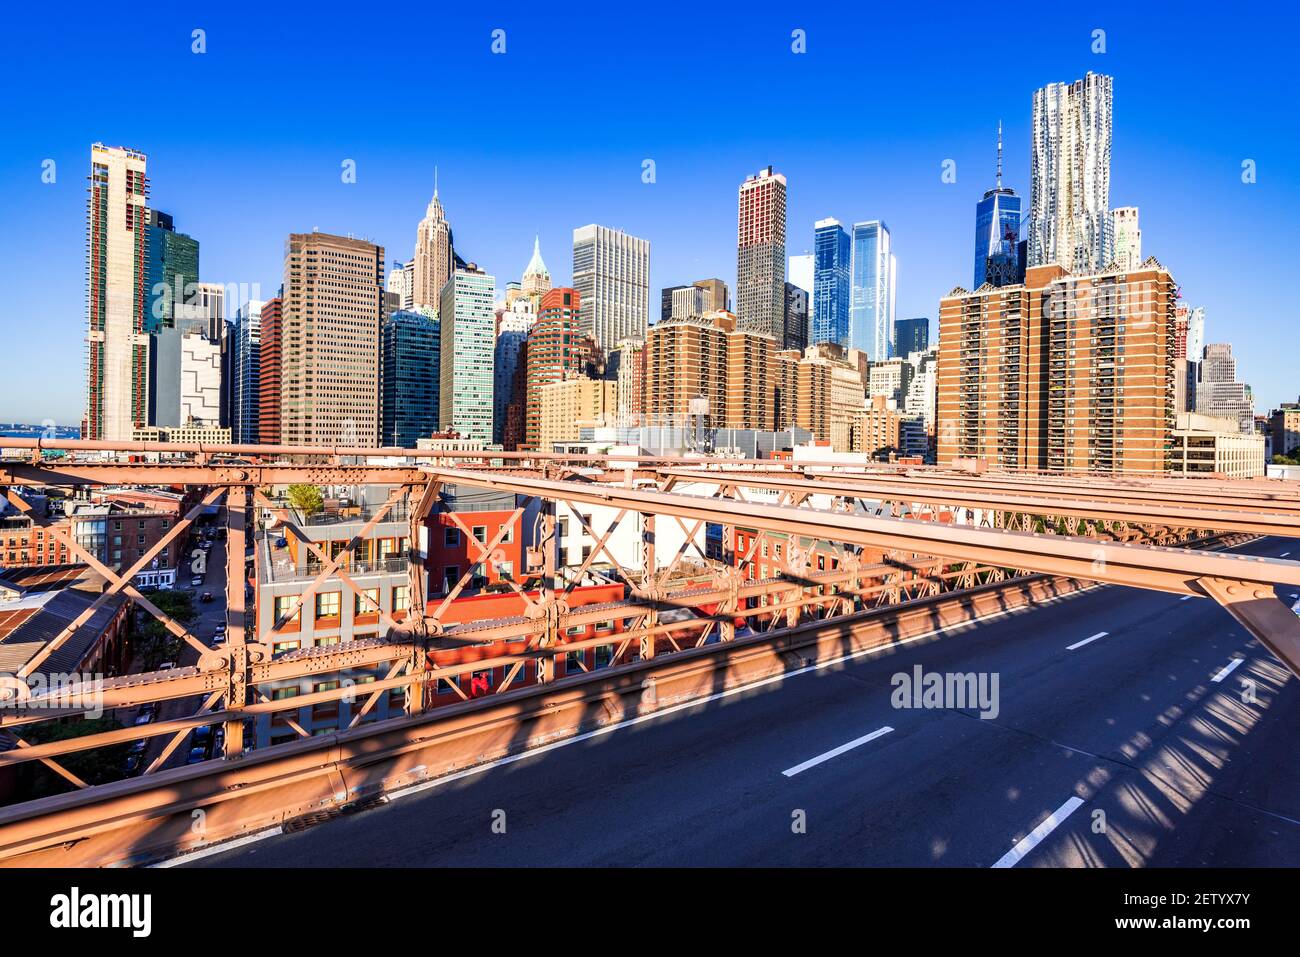 New York, Brooklyn Bridge - Downtown of Manhattan, New York city architectural scenery in United States of America. Stock Photo